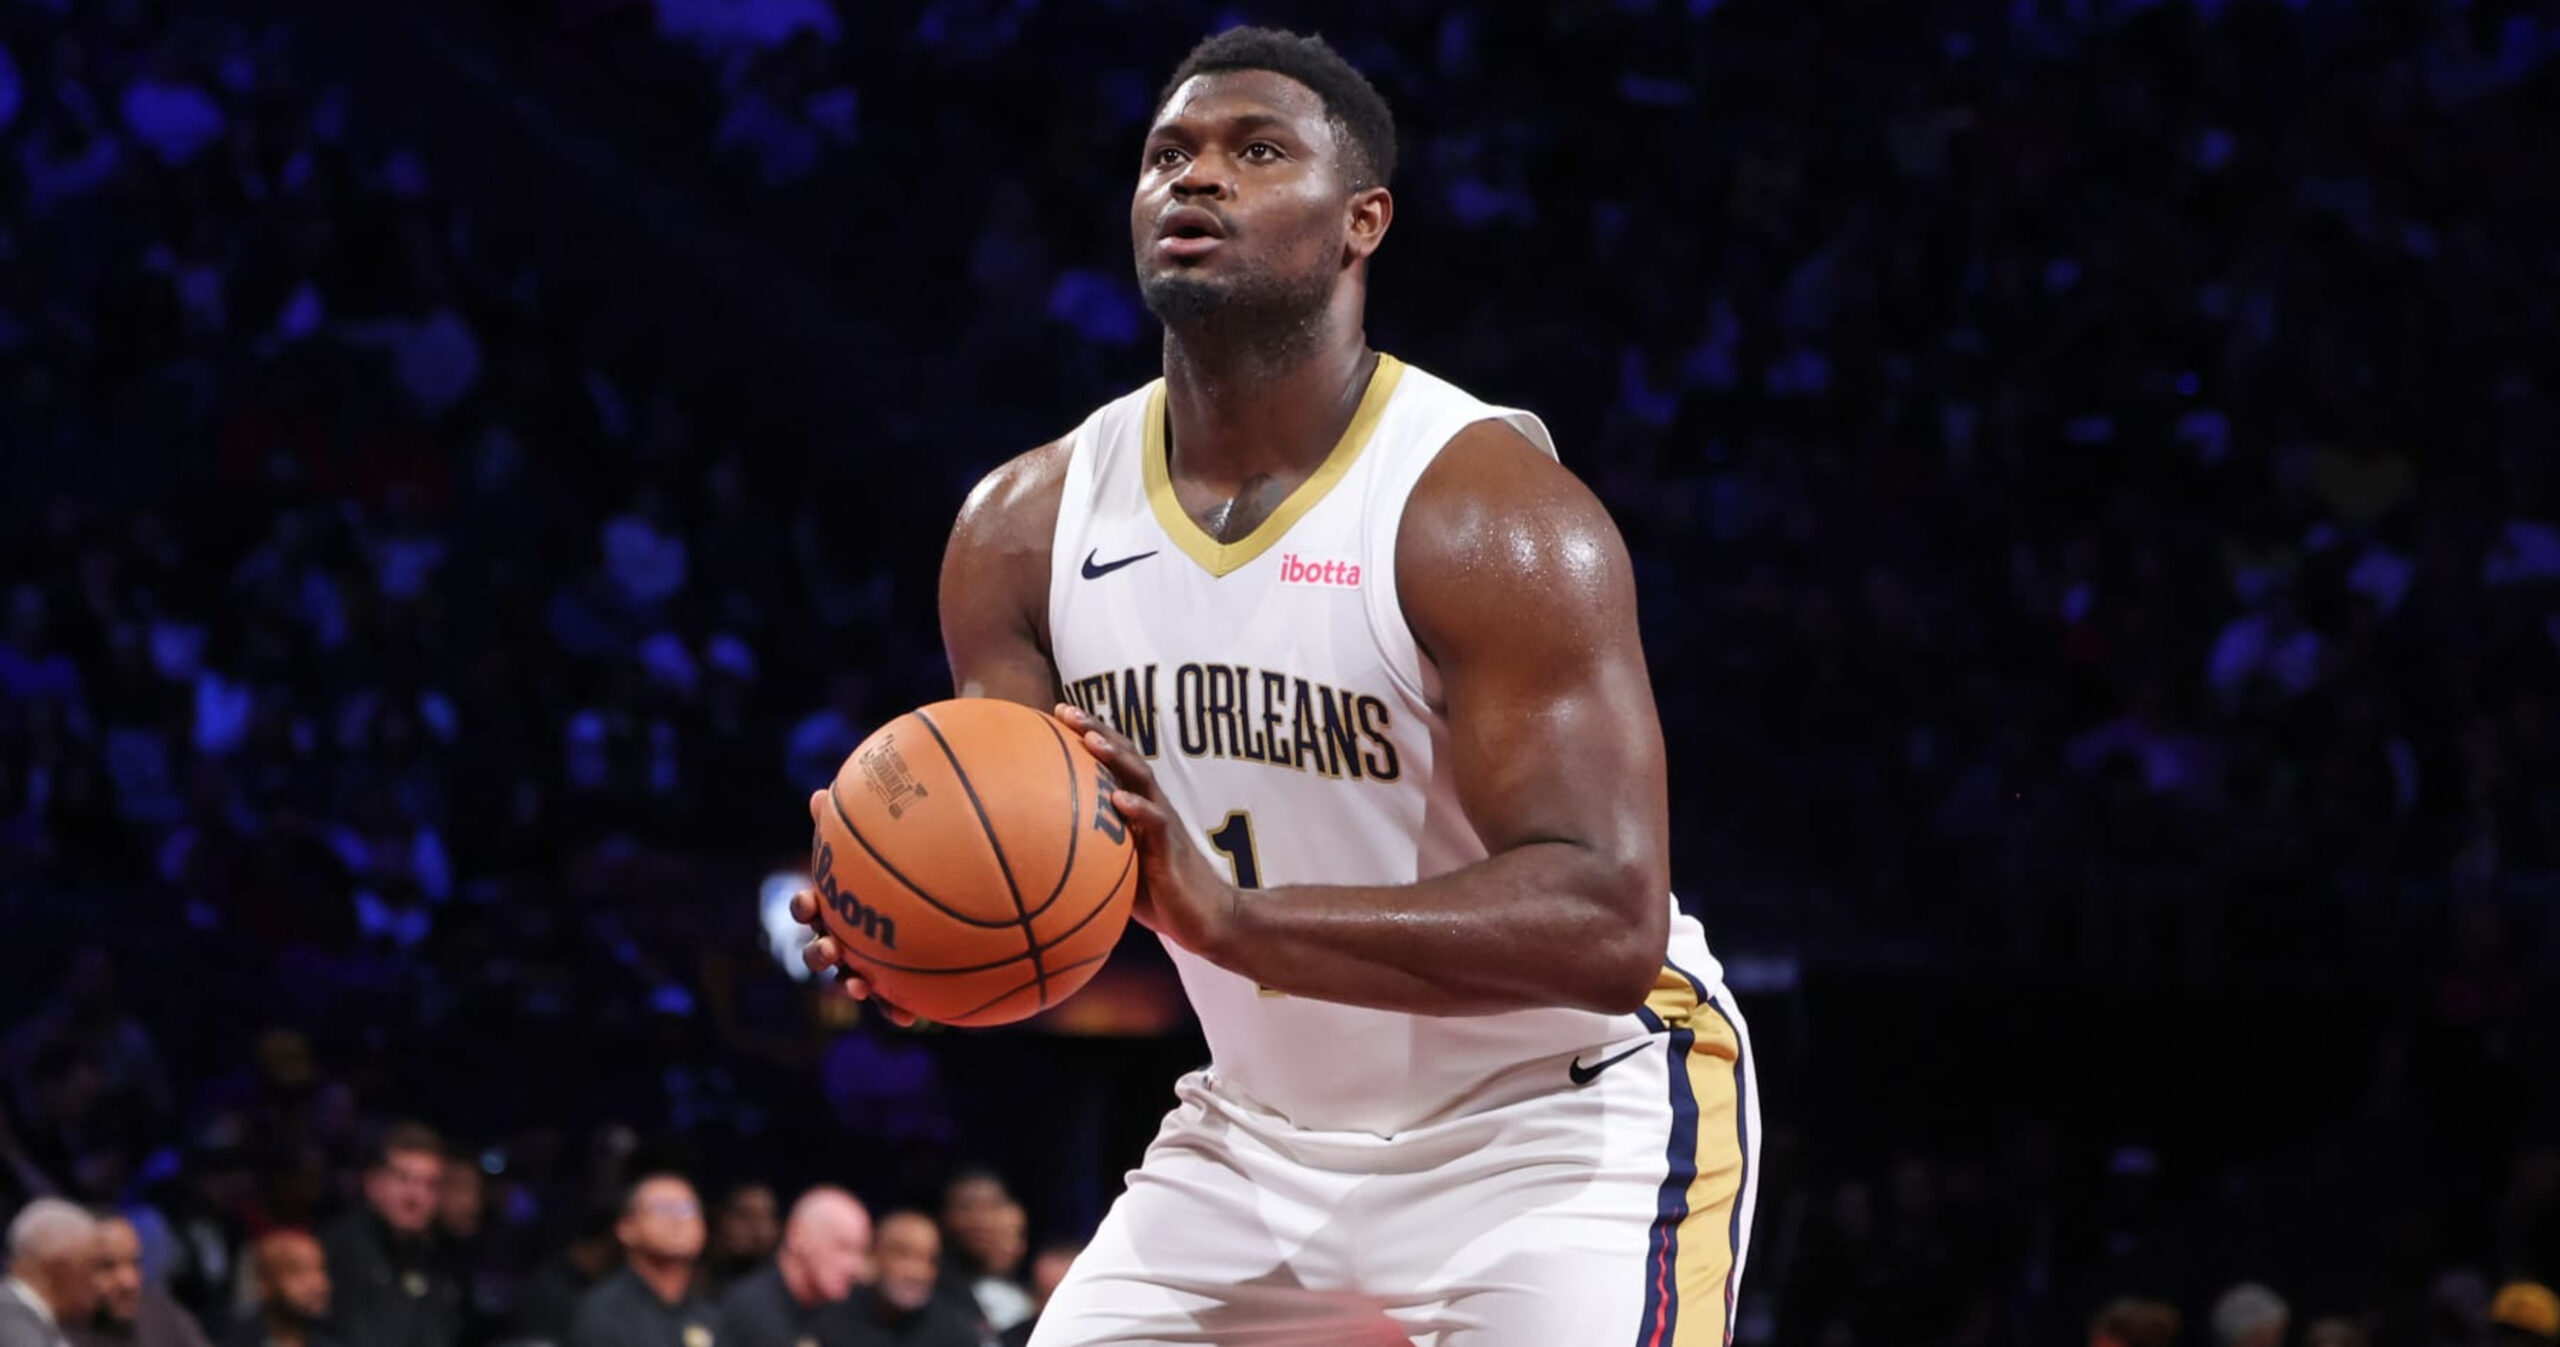 Zion Williamson Thanks Pelicans Fans for Support Amid Rumors About Fitness, Diet